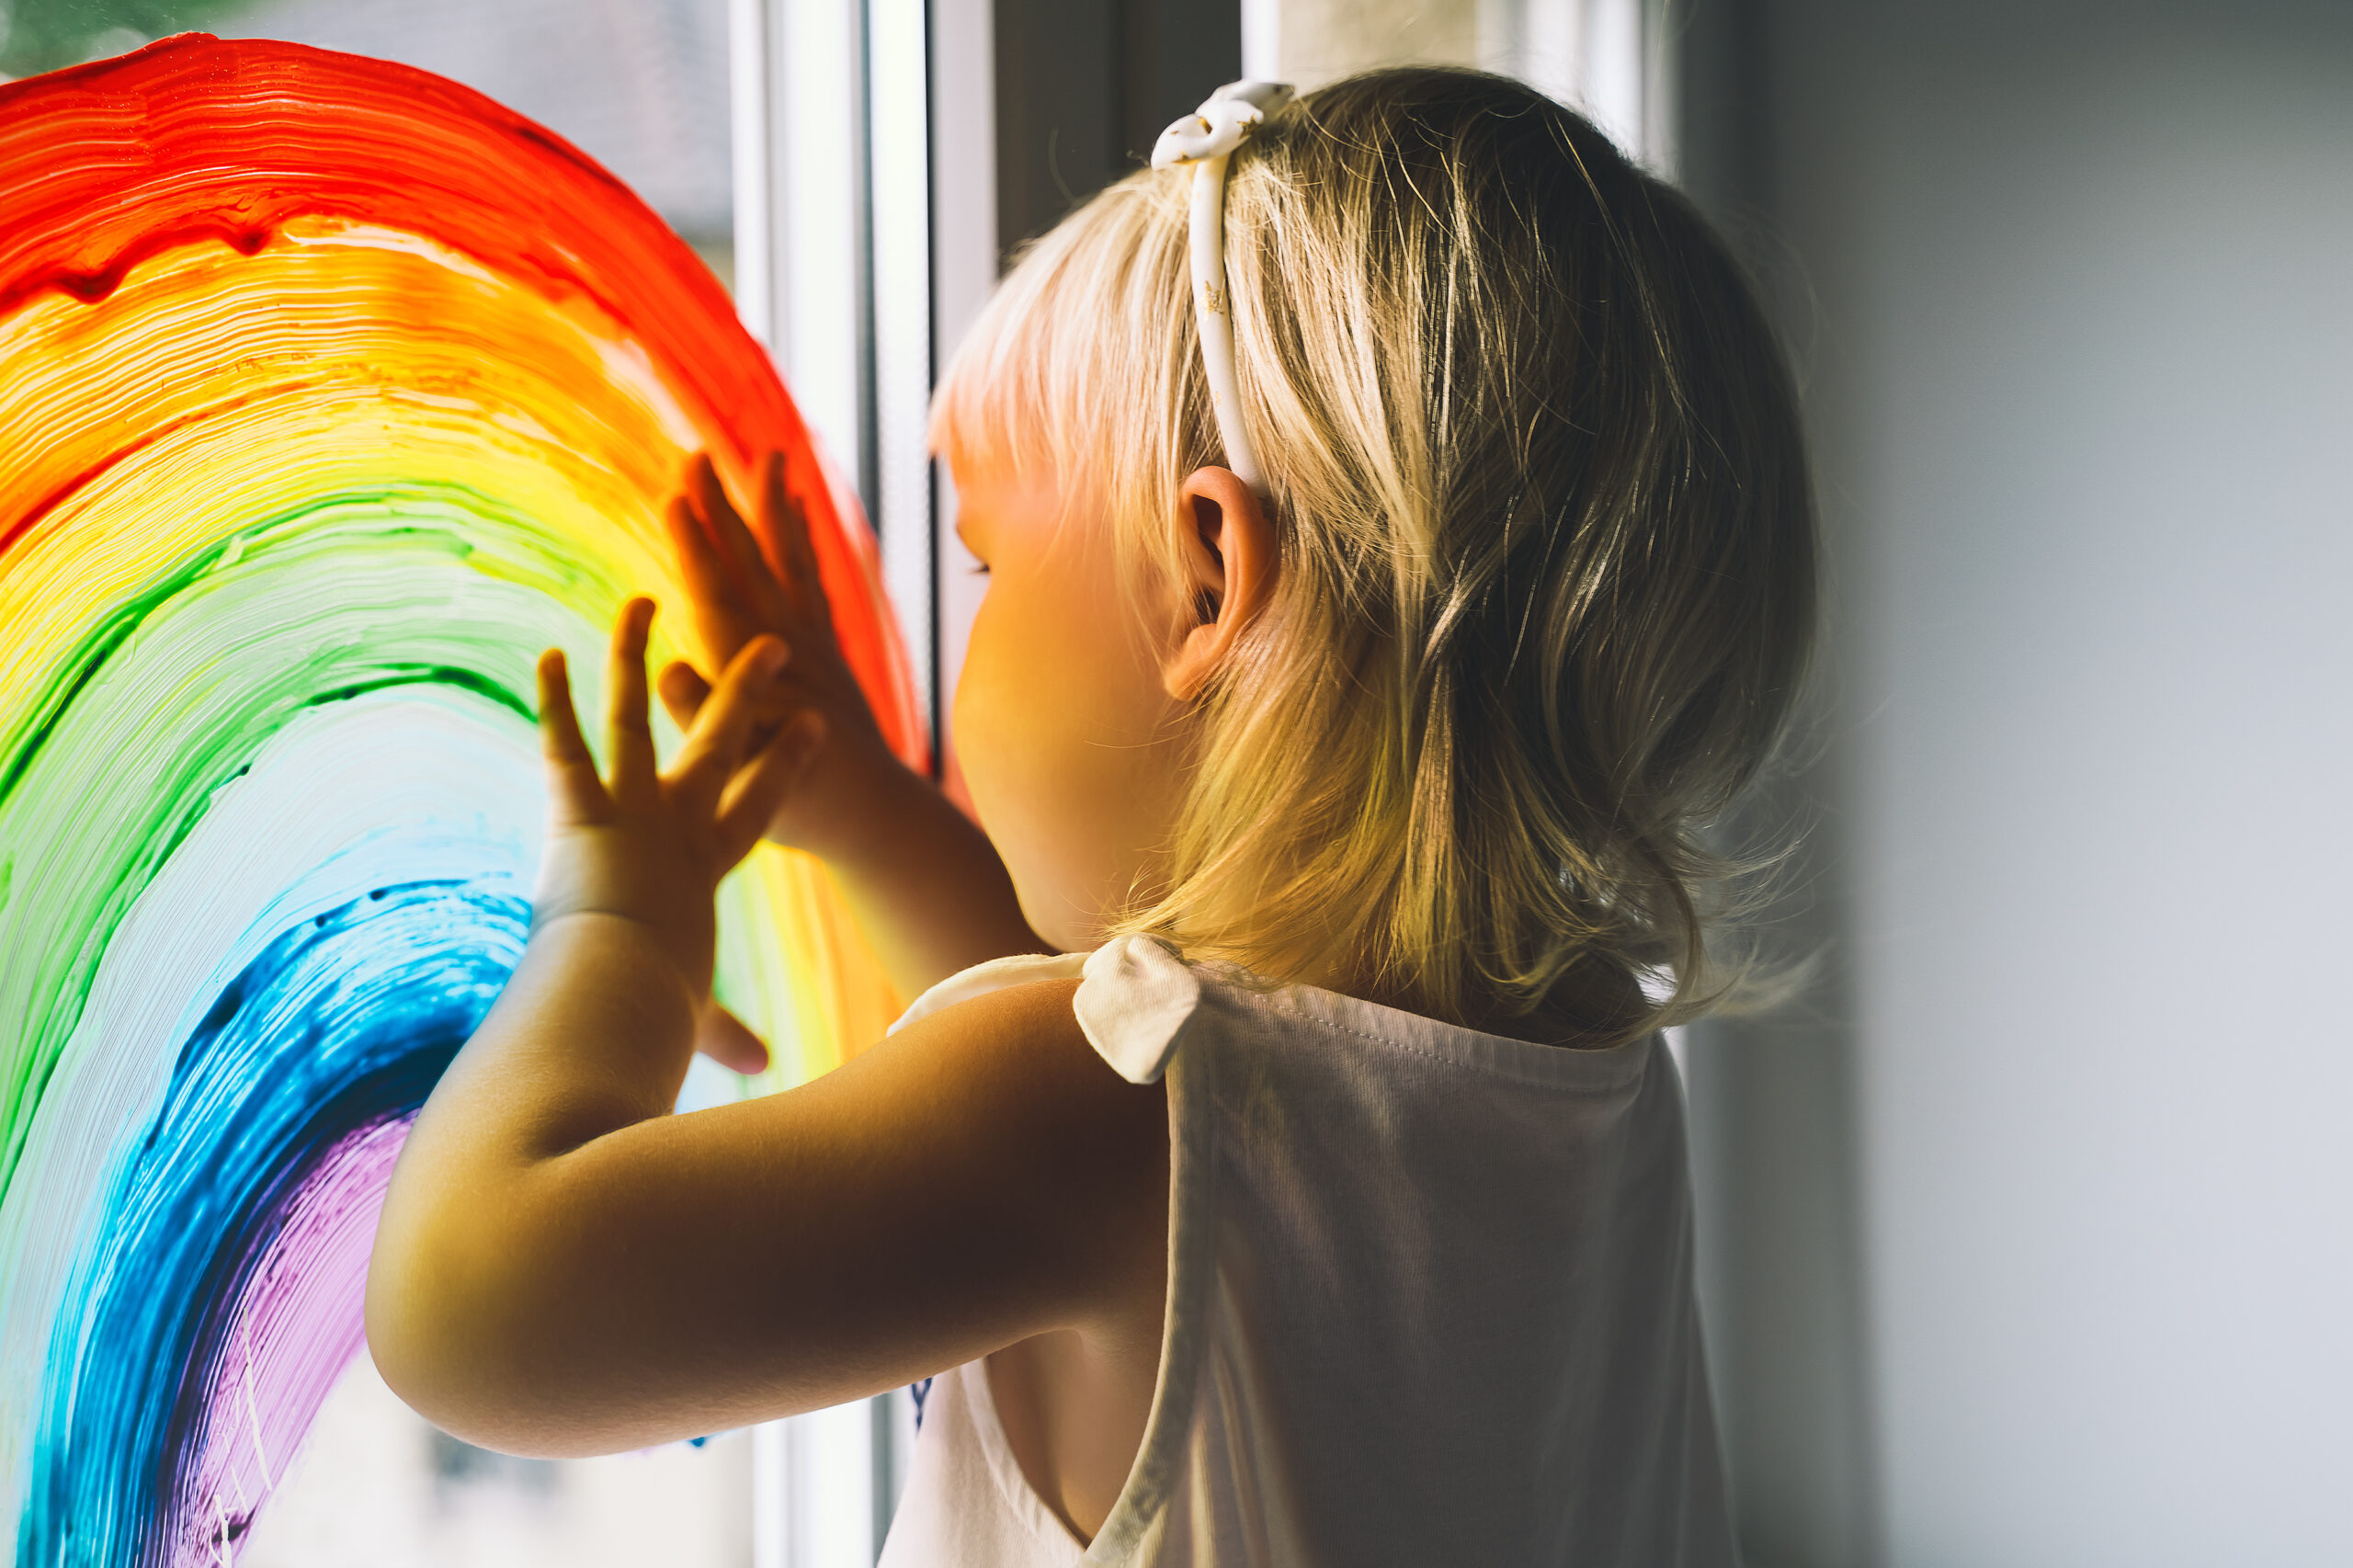 Little girl hands touch painting rainbow on window. Child Art and Creative. Kids leisure at home, childcare, safety joy symbol. Positive visual support during quarantine Coronavirus Covid-19 at home.